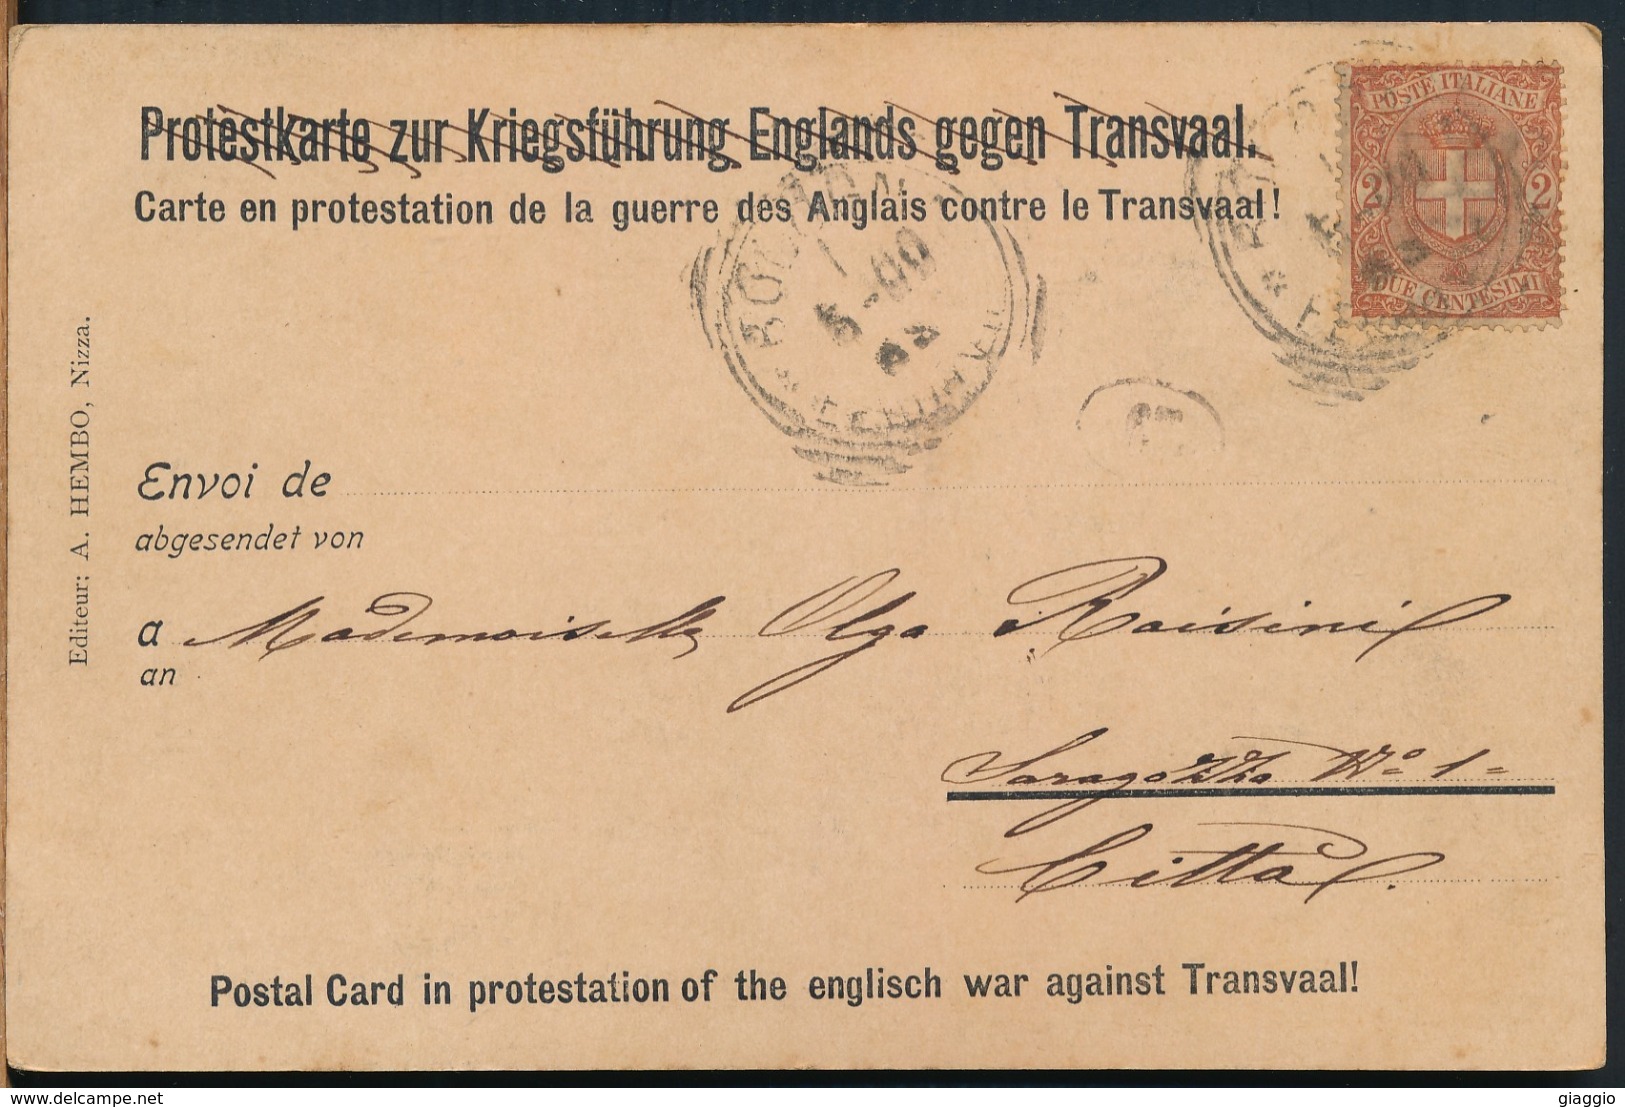 °°° 14523 - ILL H.W.KUHTZ - POSTCARD IN PROTESTATION OF THE ENGLISH WAR AGAINST TRANSVAAL - 1900 With Stamps °°° - Sud Africa